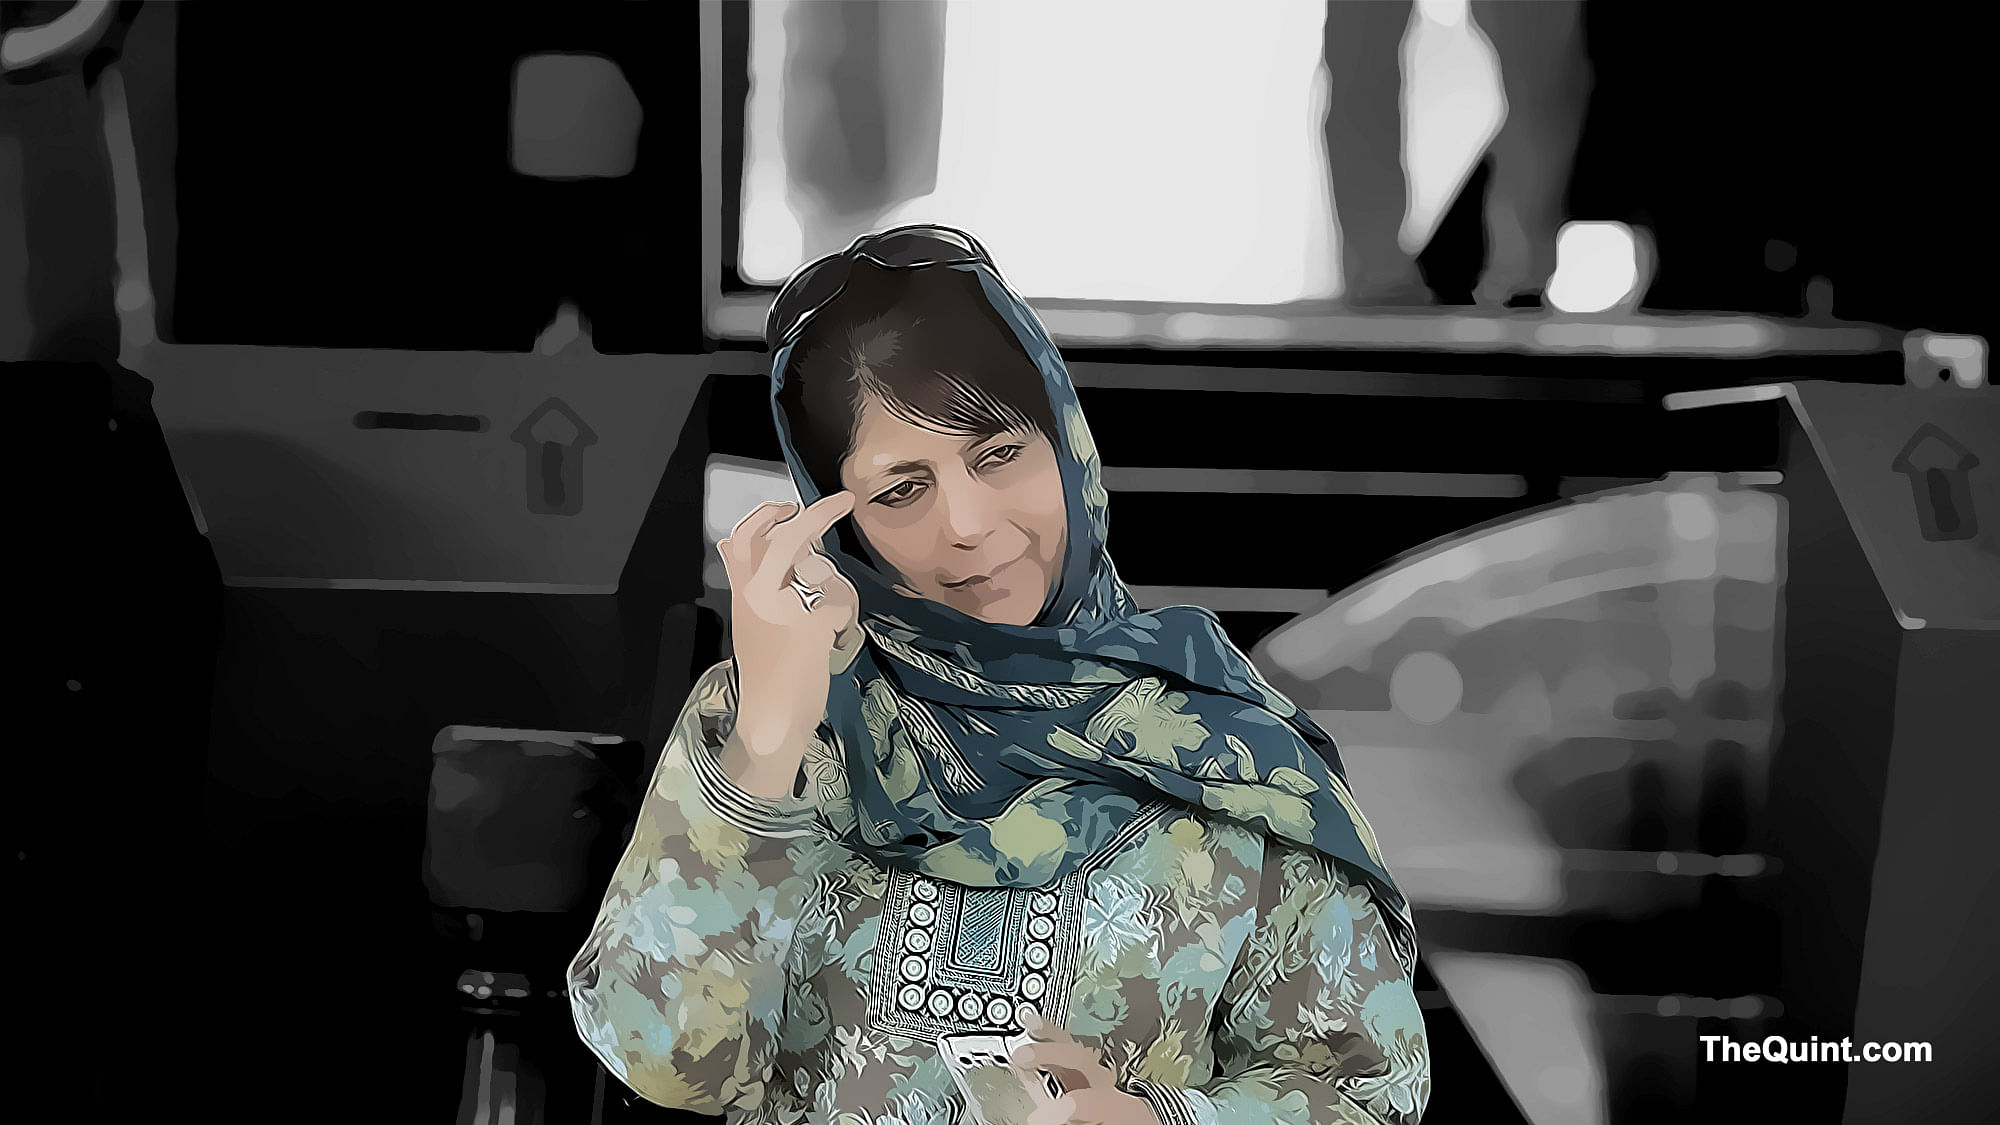 Mehbooba Mufti will take up the mantle of chief minister  at a time when she is faced with adversities, particularly on  balancing ties with alliance partner, BJP. (Photo: IANS/ Altered by <b>The Quint</b>)